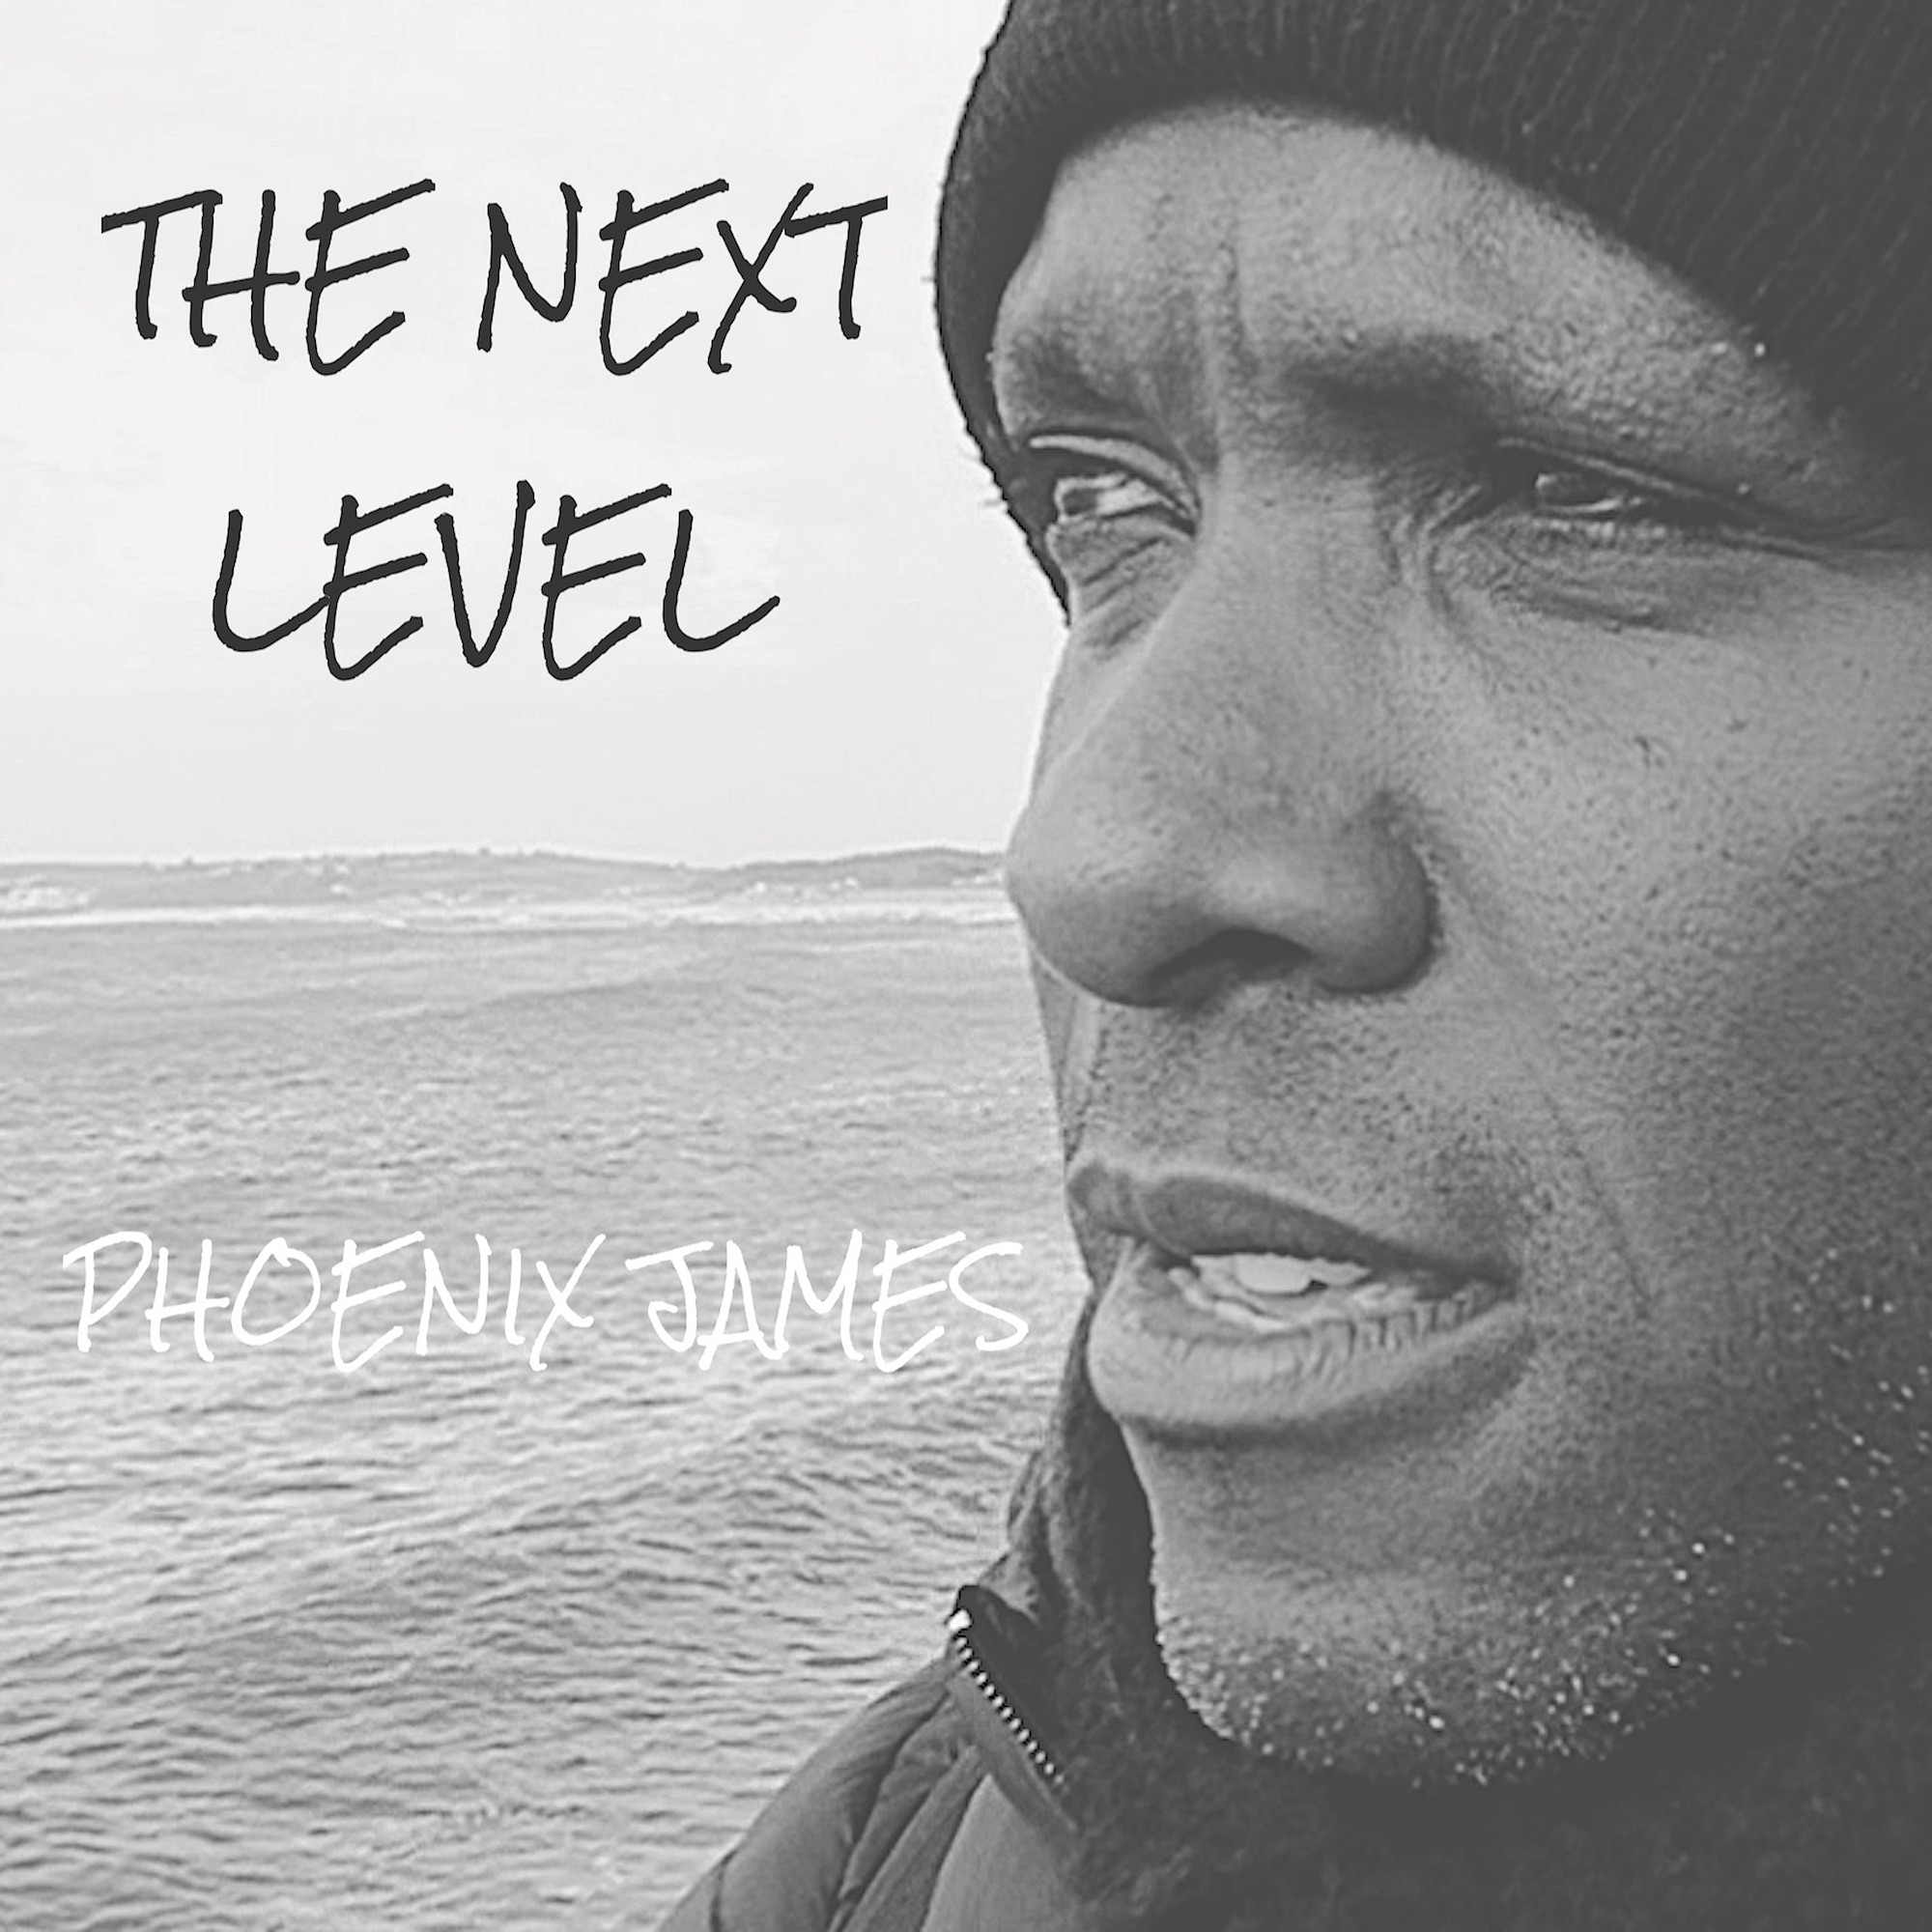 THE NEXT LEVEL - SPOKEN WORD POETRY BY PHOENIX JAMES OFFICIAL PHENZWAAN